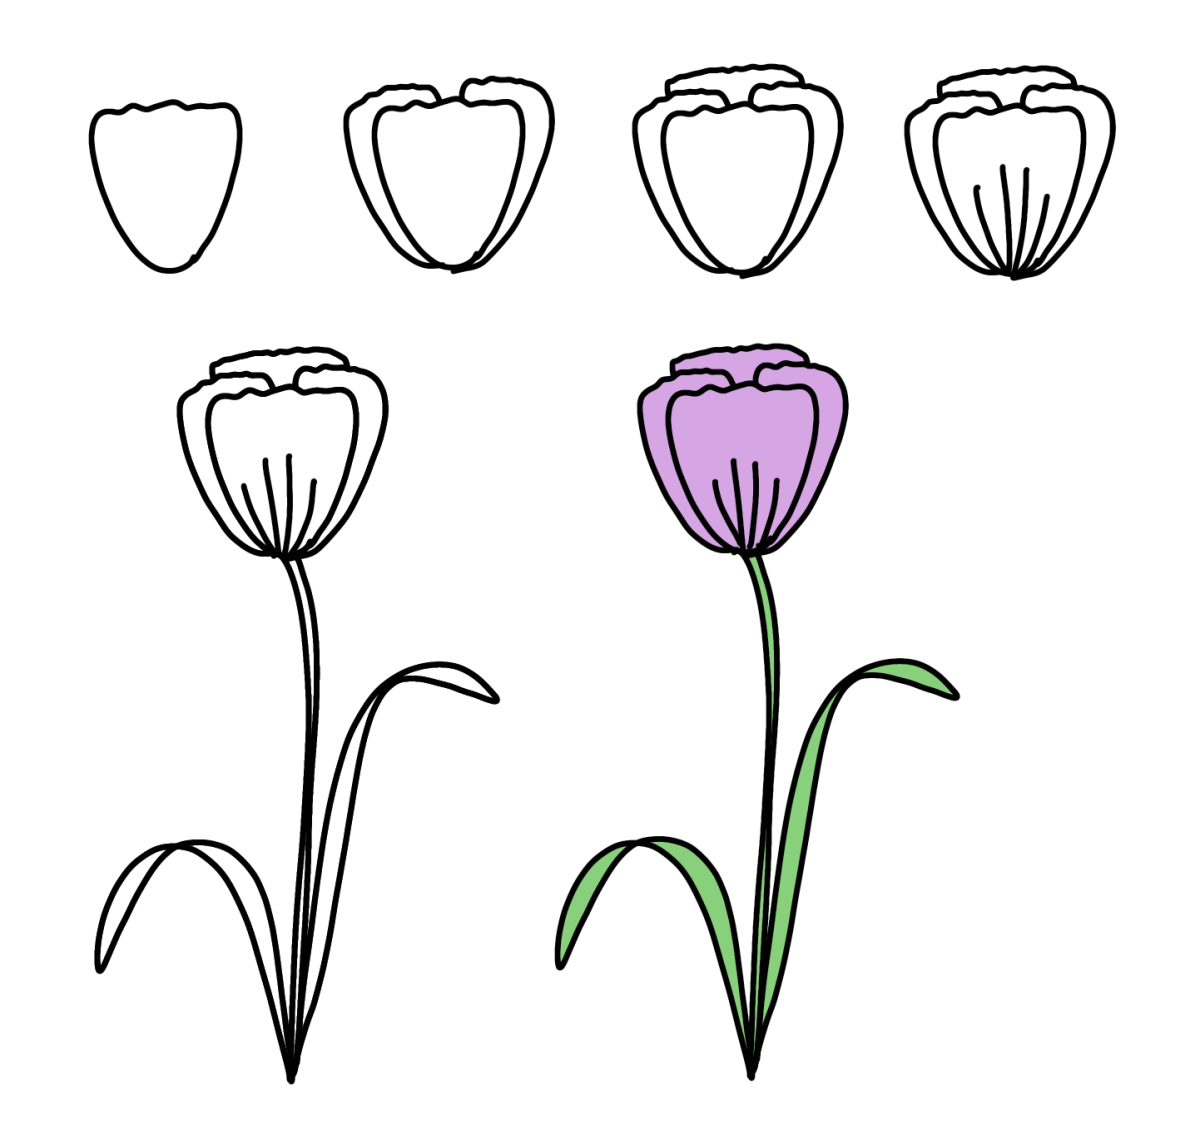 Image contains six step by step images of how to draw the closed petal flower, as described in words in the post.